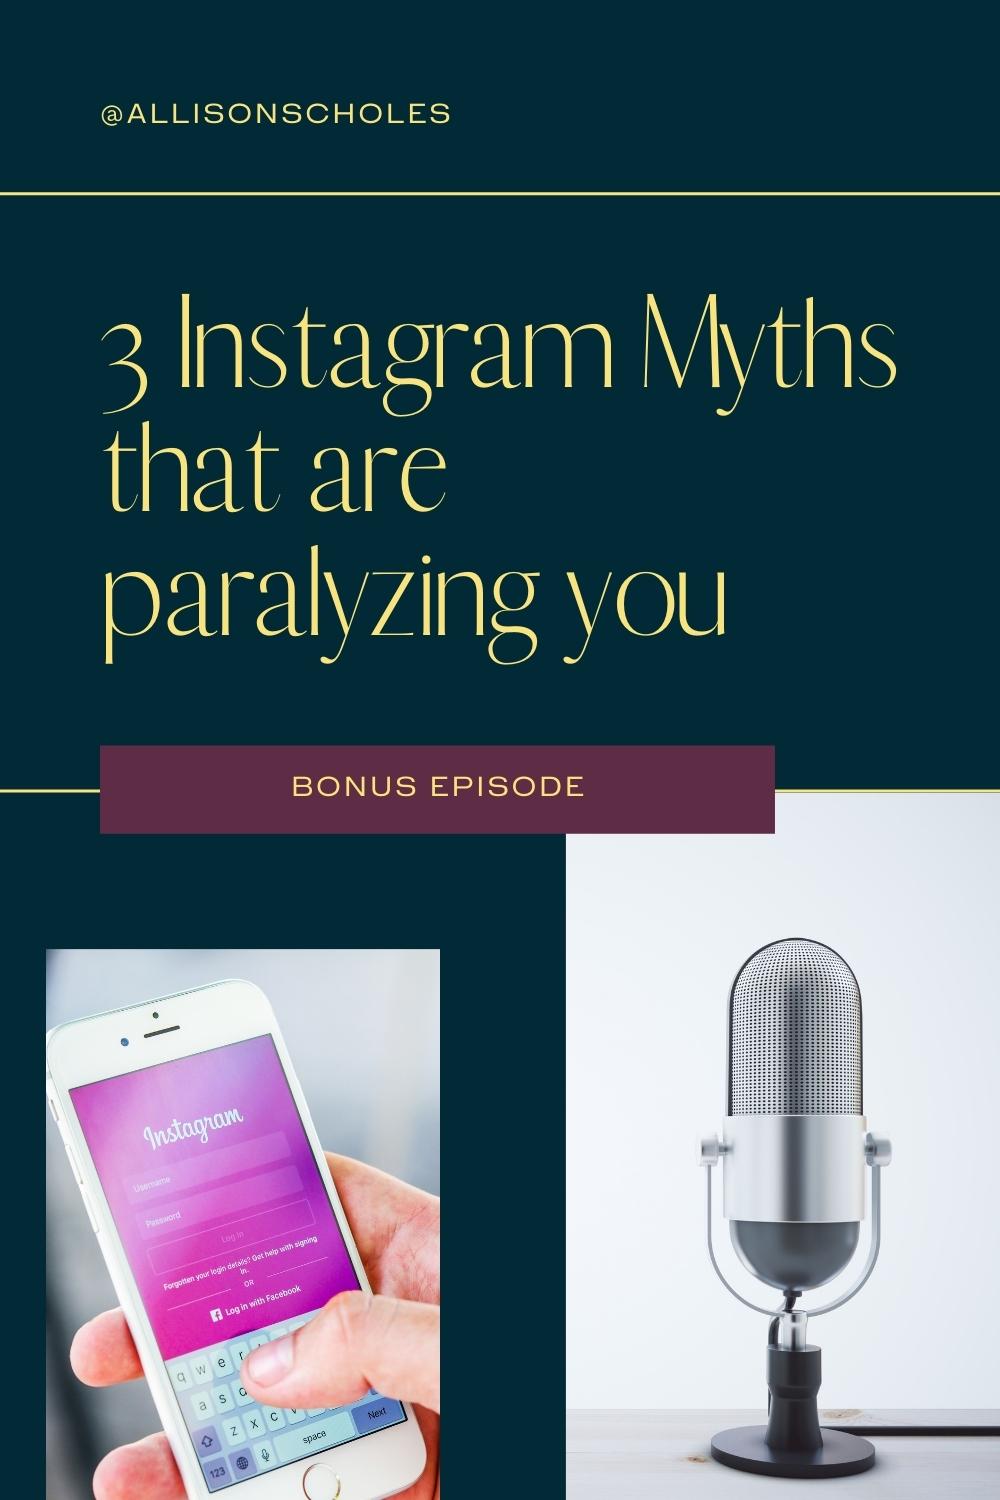 3 Instagram Myths that are paralyzing you